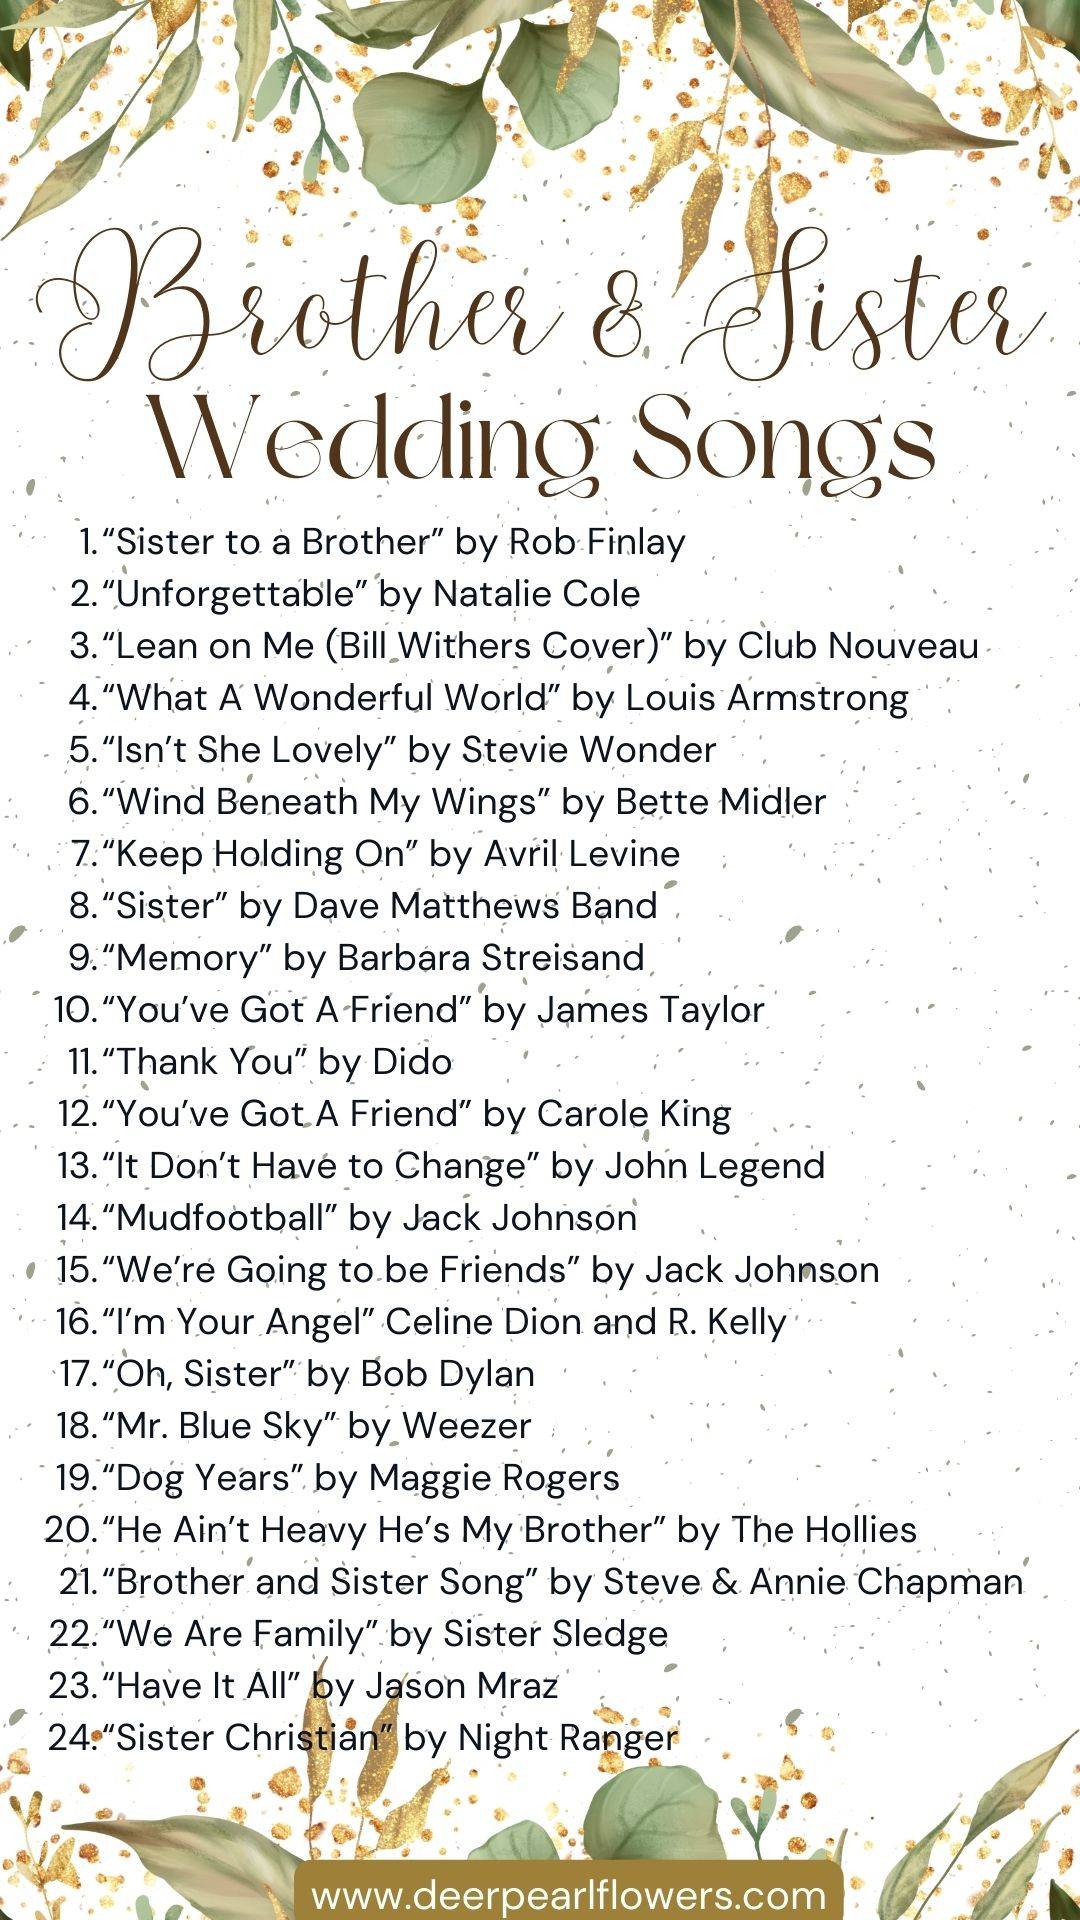 Brother and Sister Wedding Songs